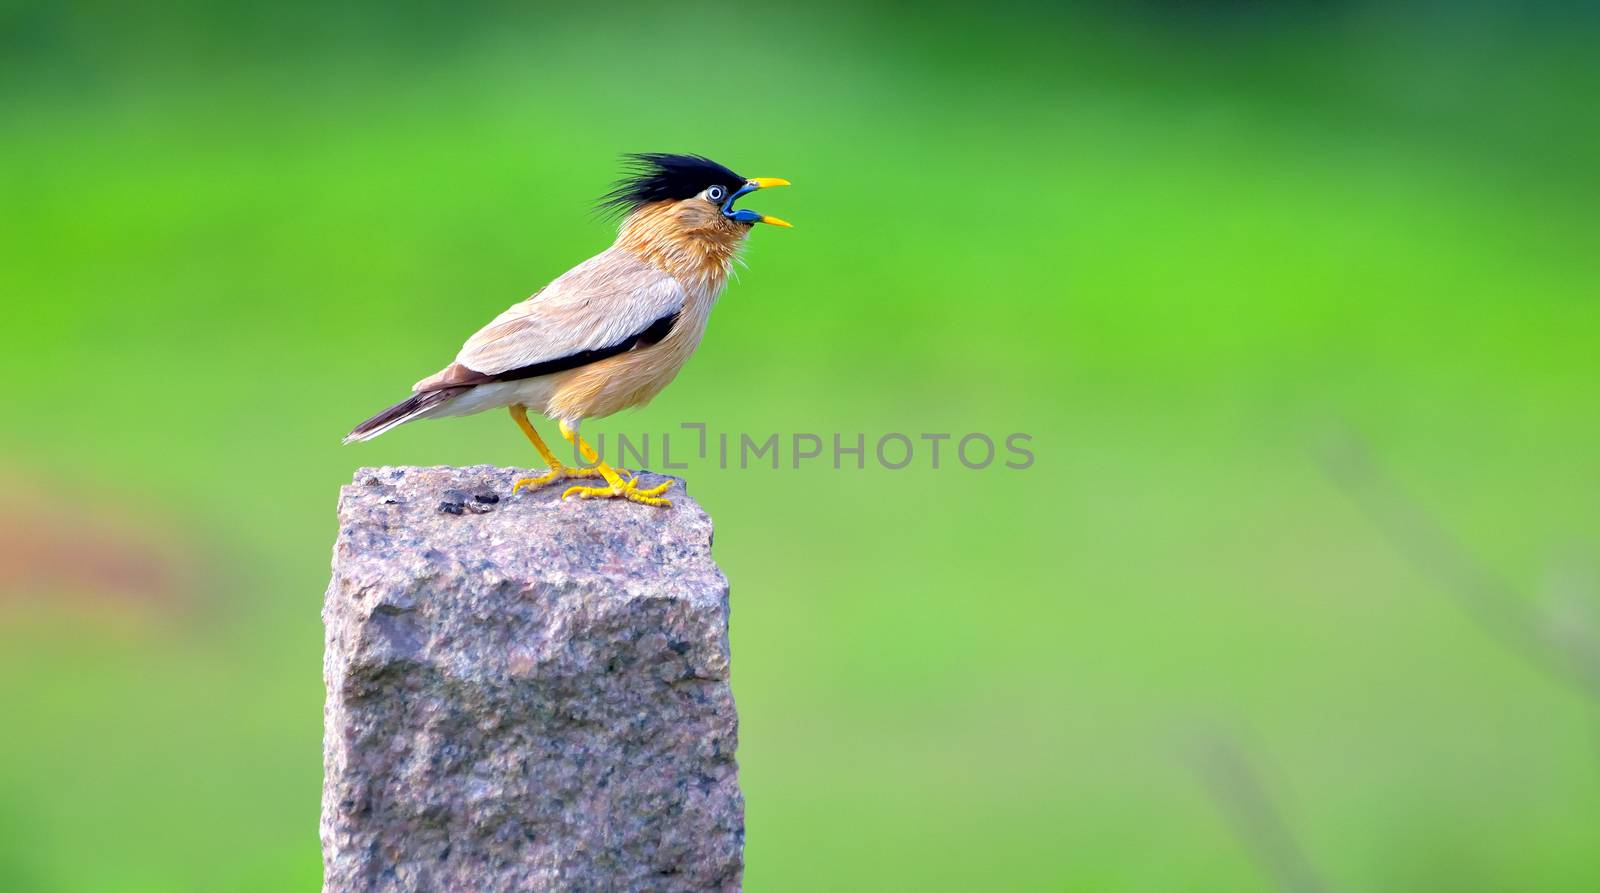 The brahminy myna or brahminy starling is a member of the starling family of birds. It is usually seen in pairs or small flocks in open habitats on the plains of the Indian subcontinent.